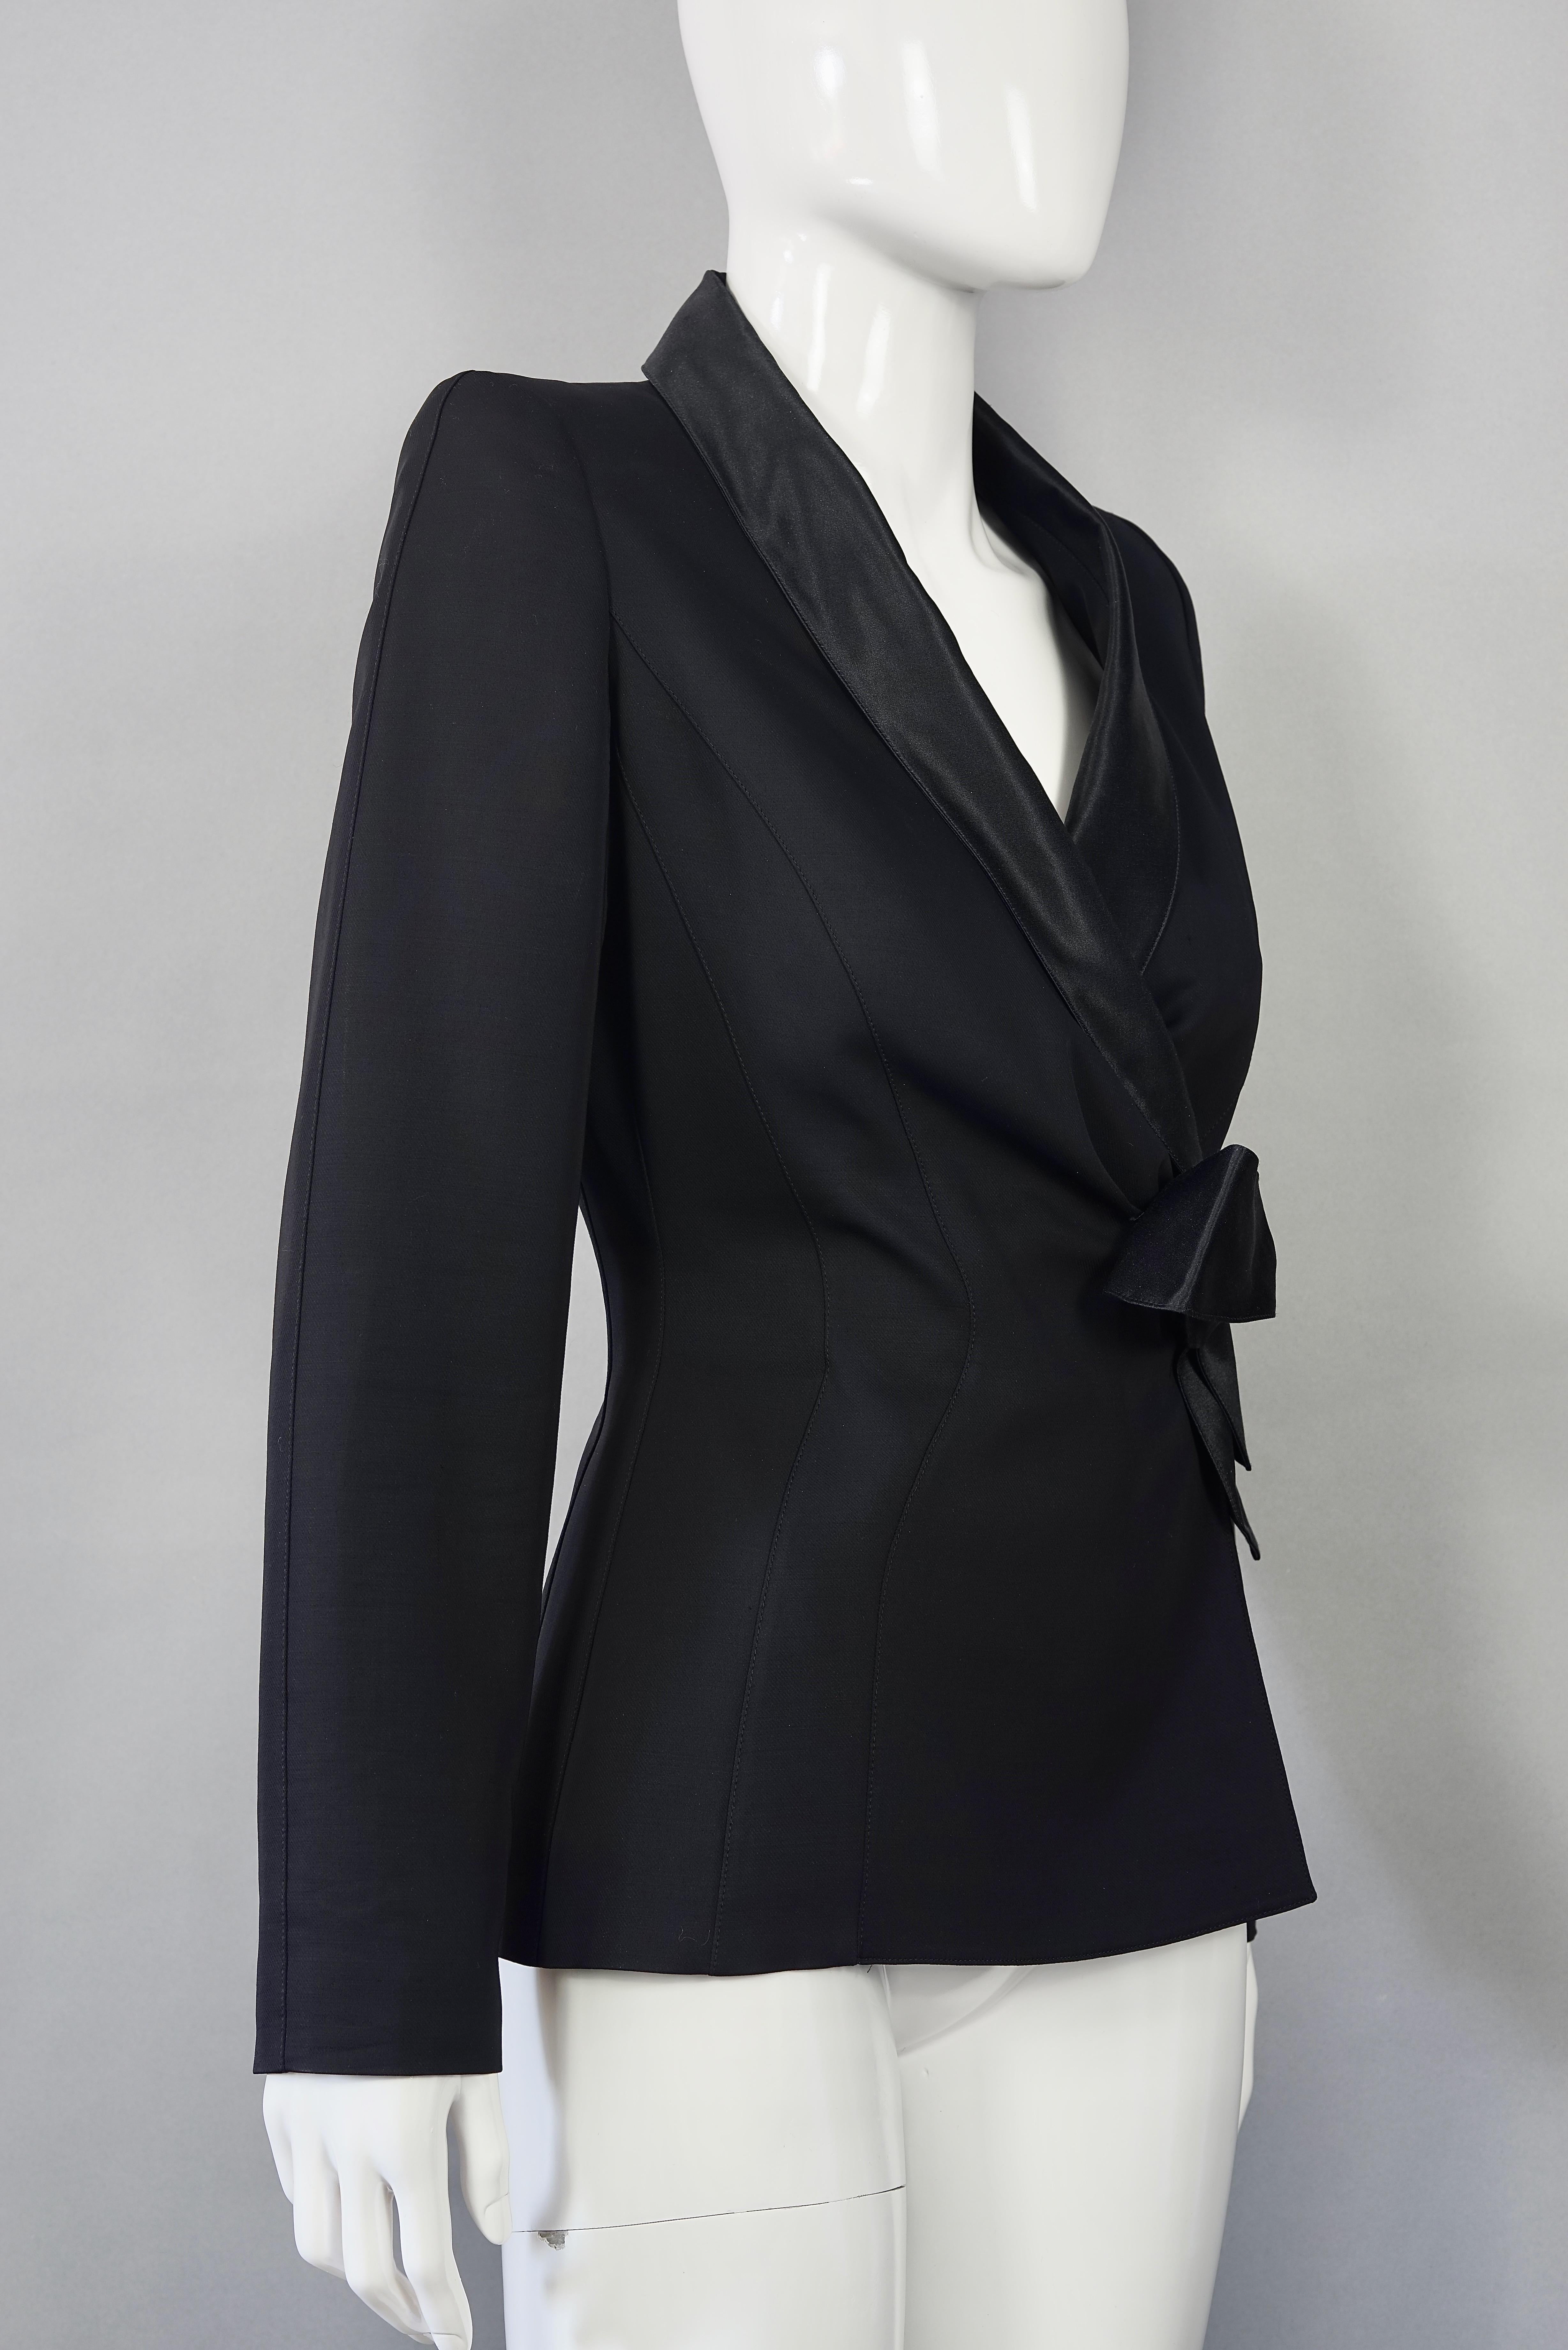 Vintage THIERRY MUGLER PARIS Wrap Silk Bow Jacket

Measurements taken laid flat, please double bust and waist:
Shoulder: 13.58 inches (34.5 cm)
Sleeves: 24.21 inches (61.5 cm)
Bust: 16.93 inches (43 cm)
Waist: 13.77 inches (35 cm)
Length: 25.19